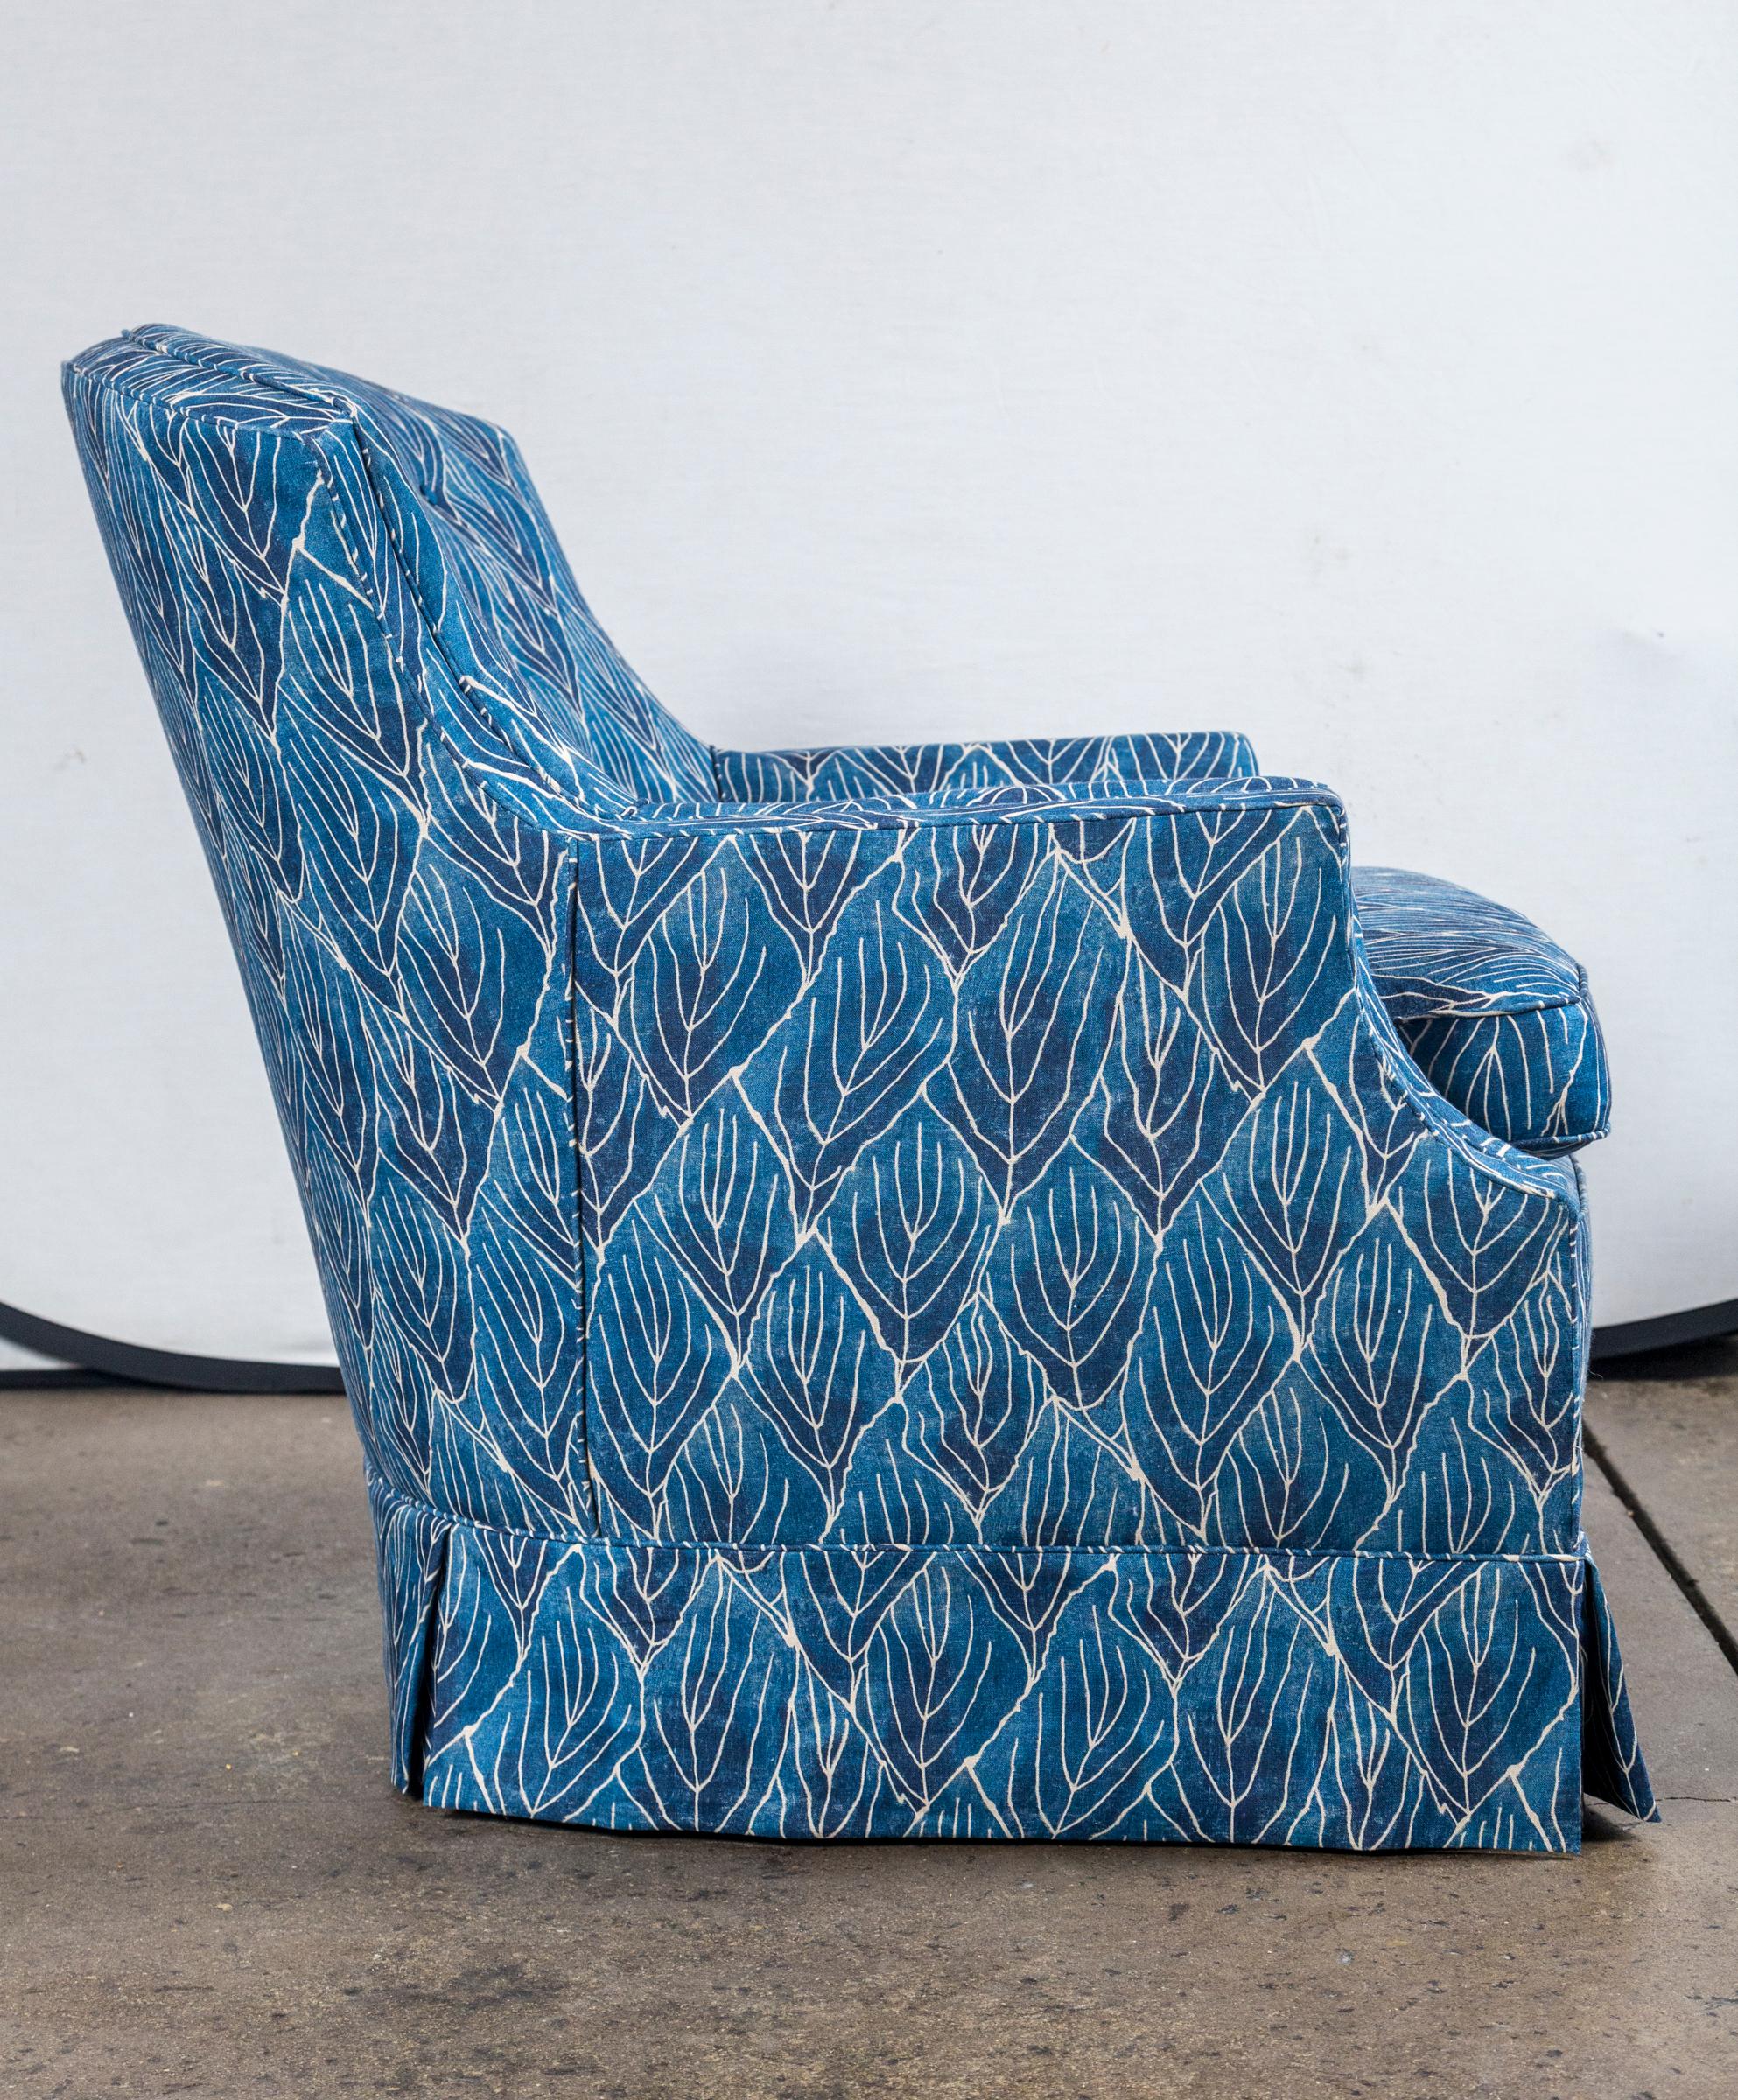 Upholstery Pair of Vintage Blue Club Chairs, Newly Upholstered in Robert Kime Nara Fabric